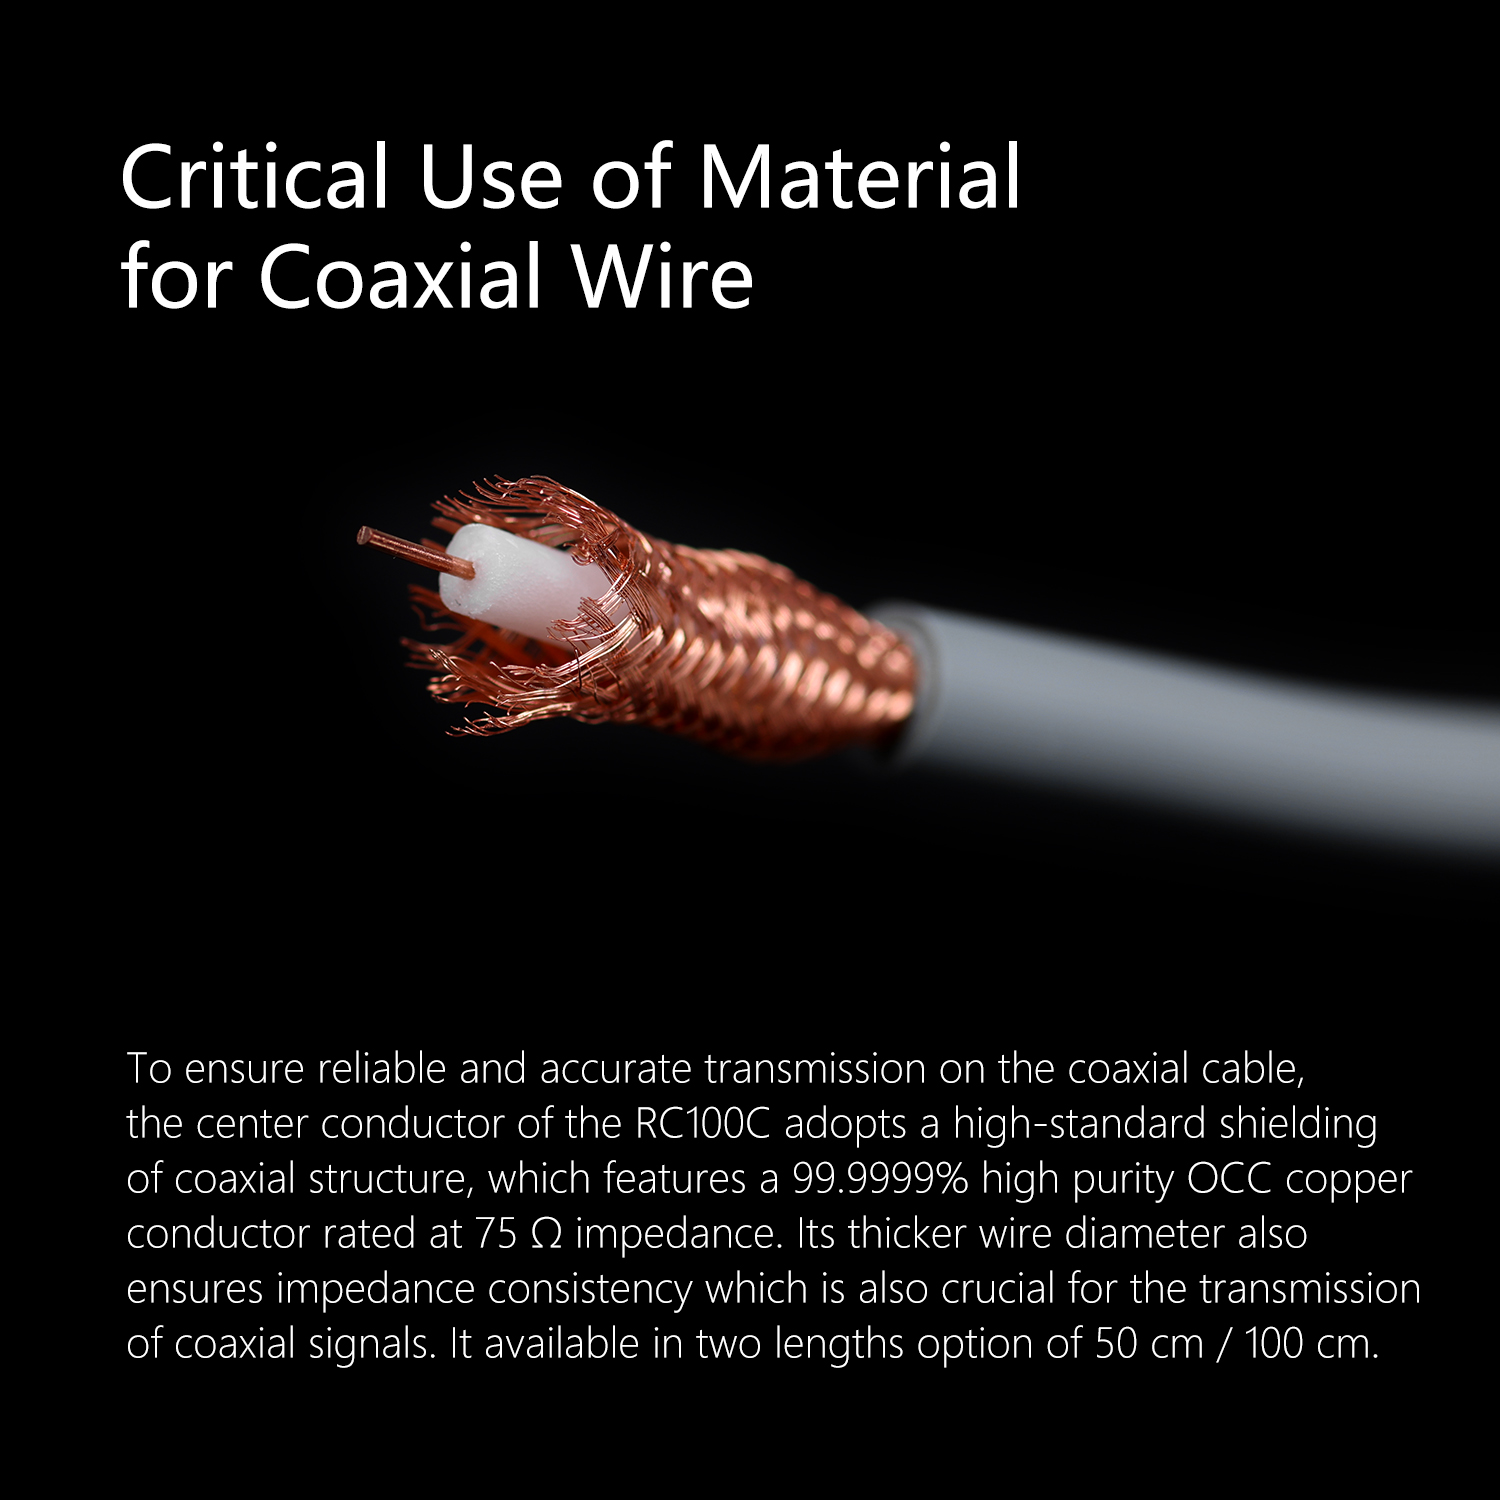 ddHiFi RC100C critical use of material for coaxial wire for reliable and accurate transmission.